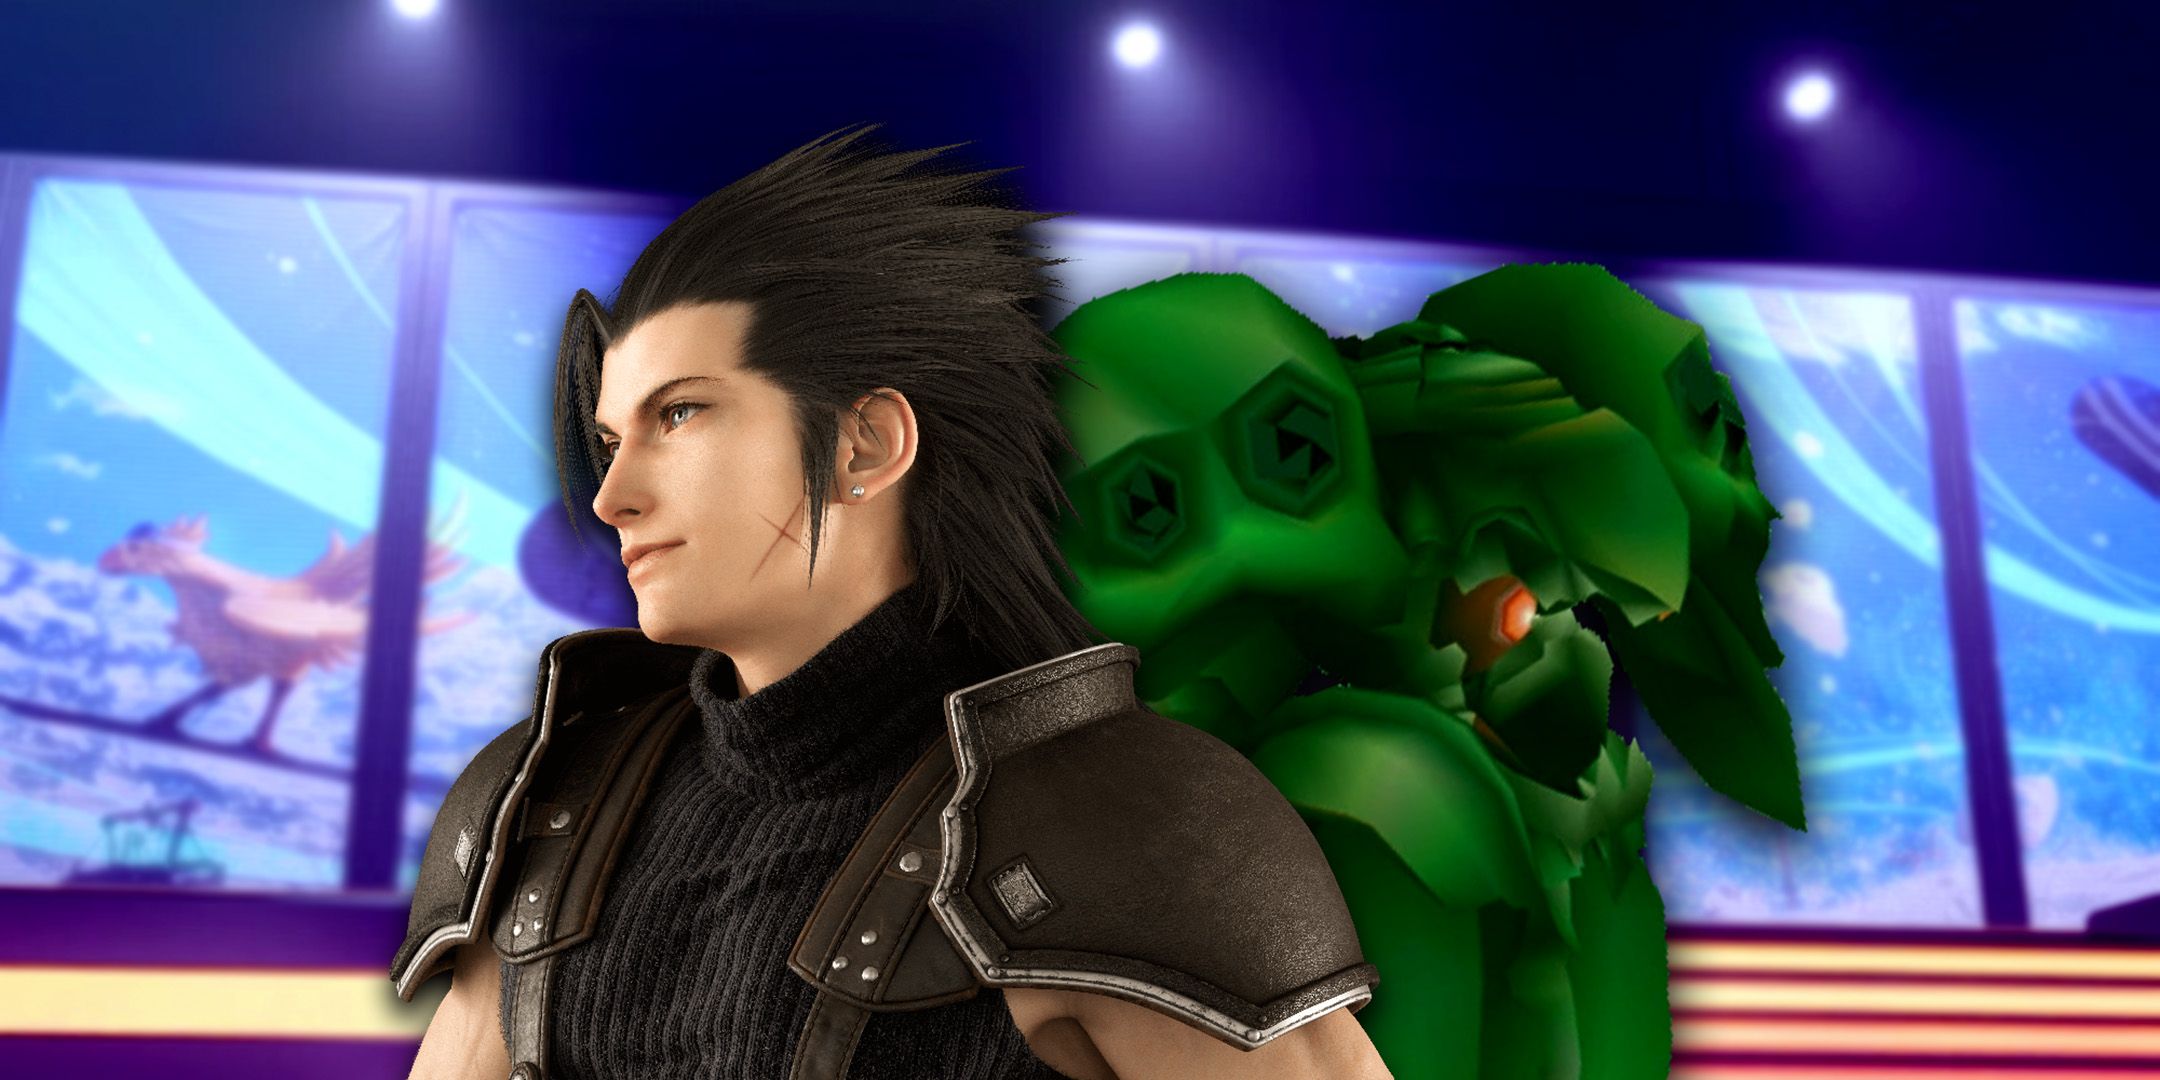 Zack Fair from Final Fantasy 7 Rebirth standing with the Emerald Weapon at the Gold Saucer arcade stage